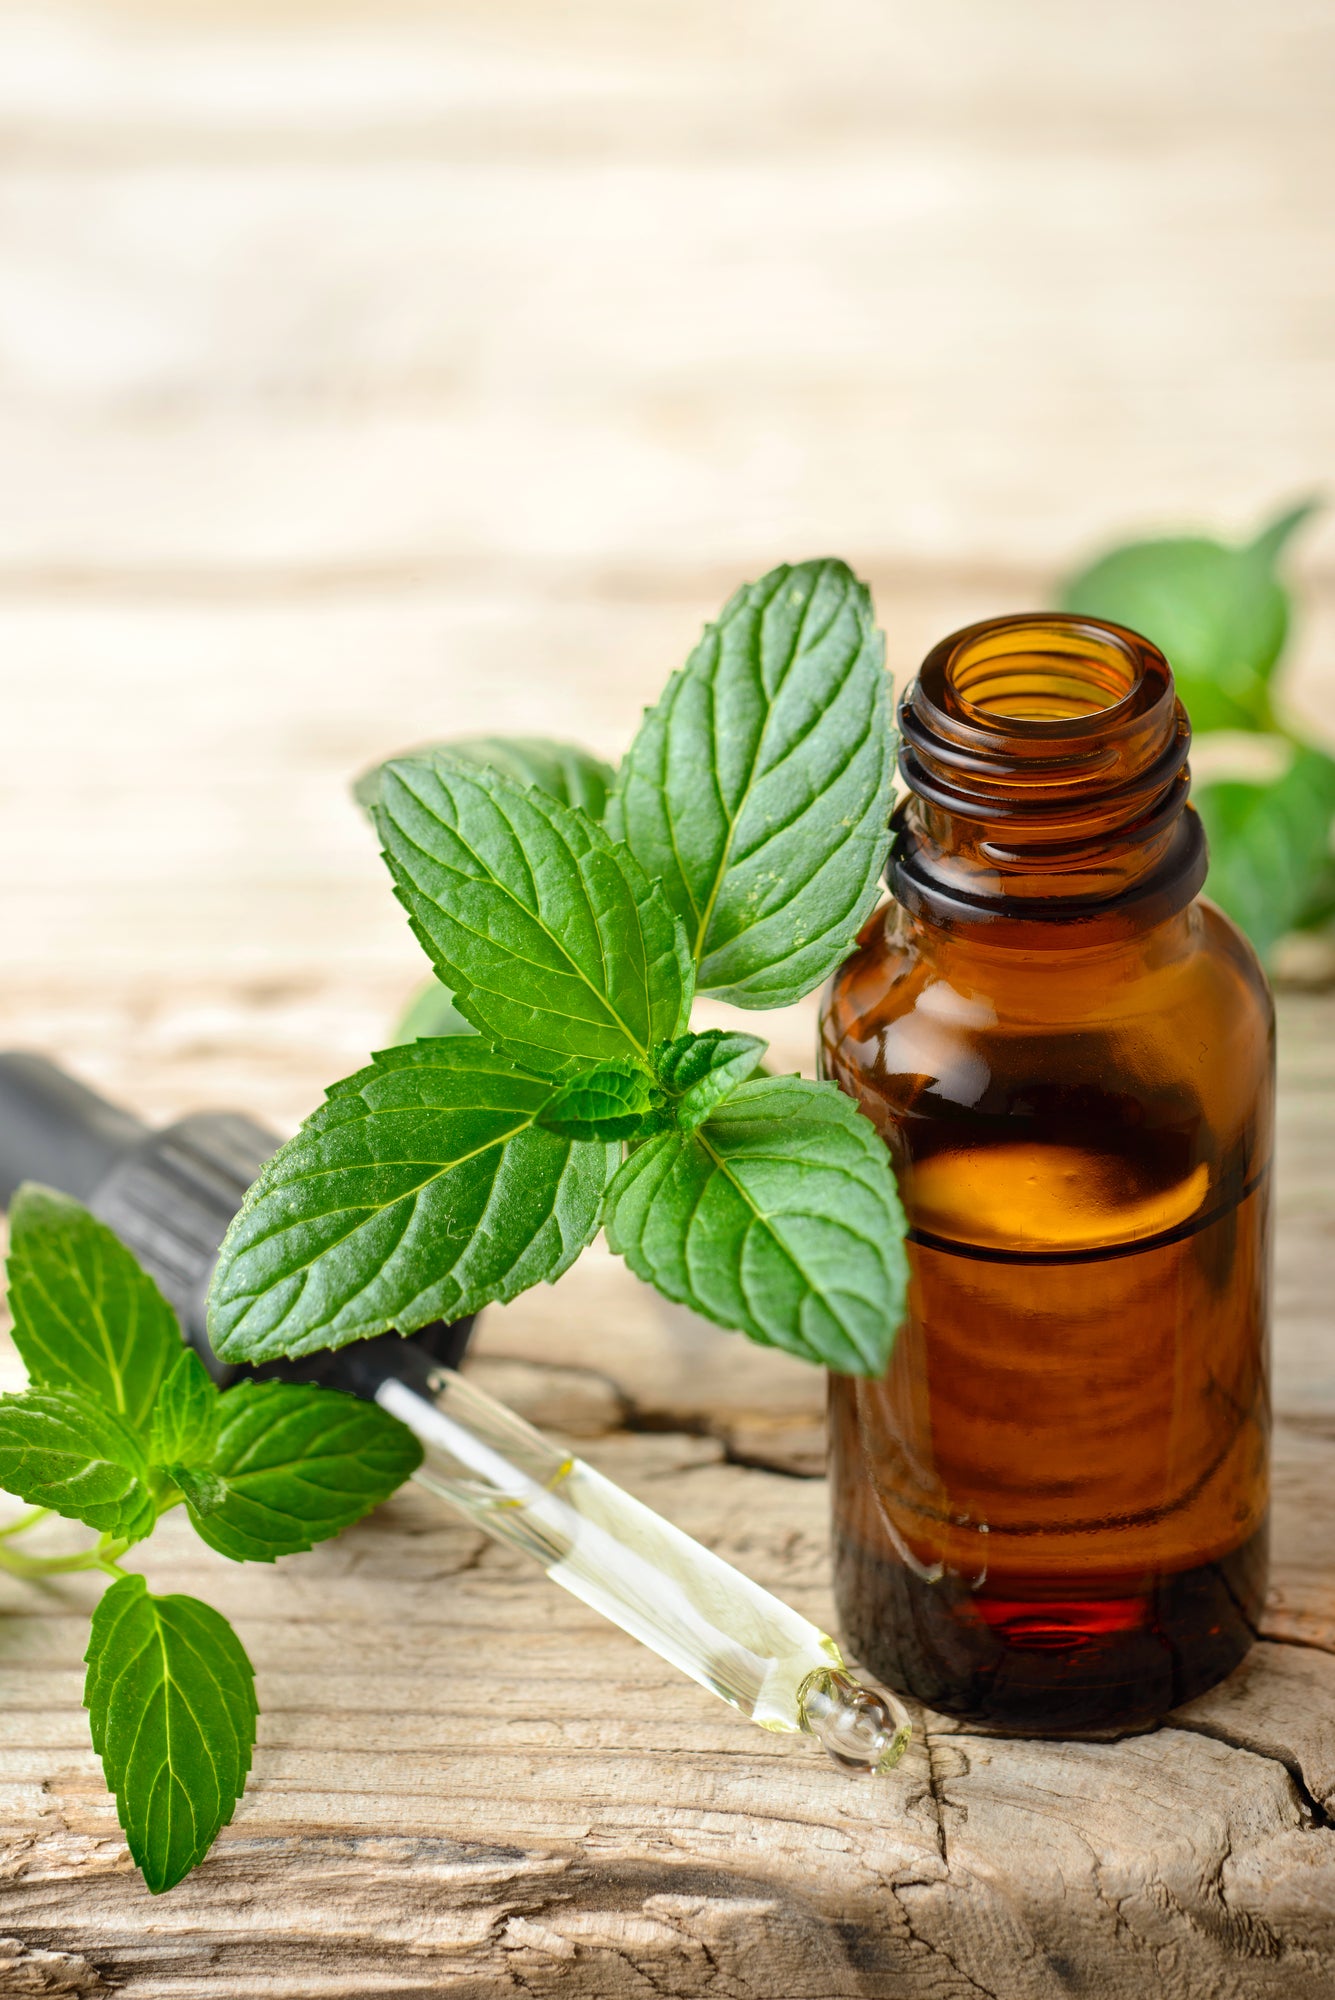 Dealing With Breakouts? Tea Tree Oil Could Be The Solution You’re Looking For